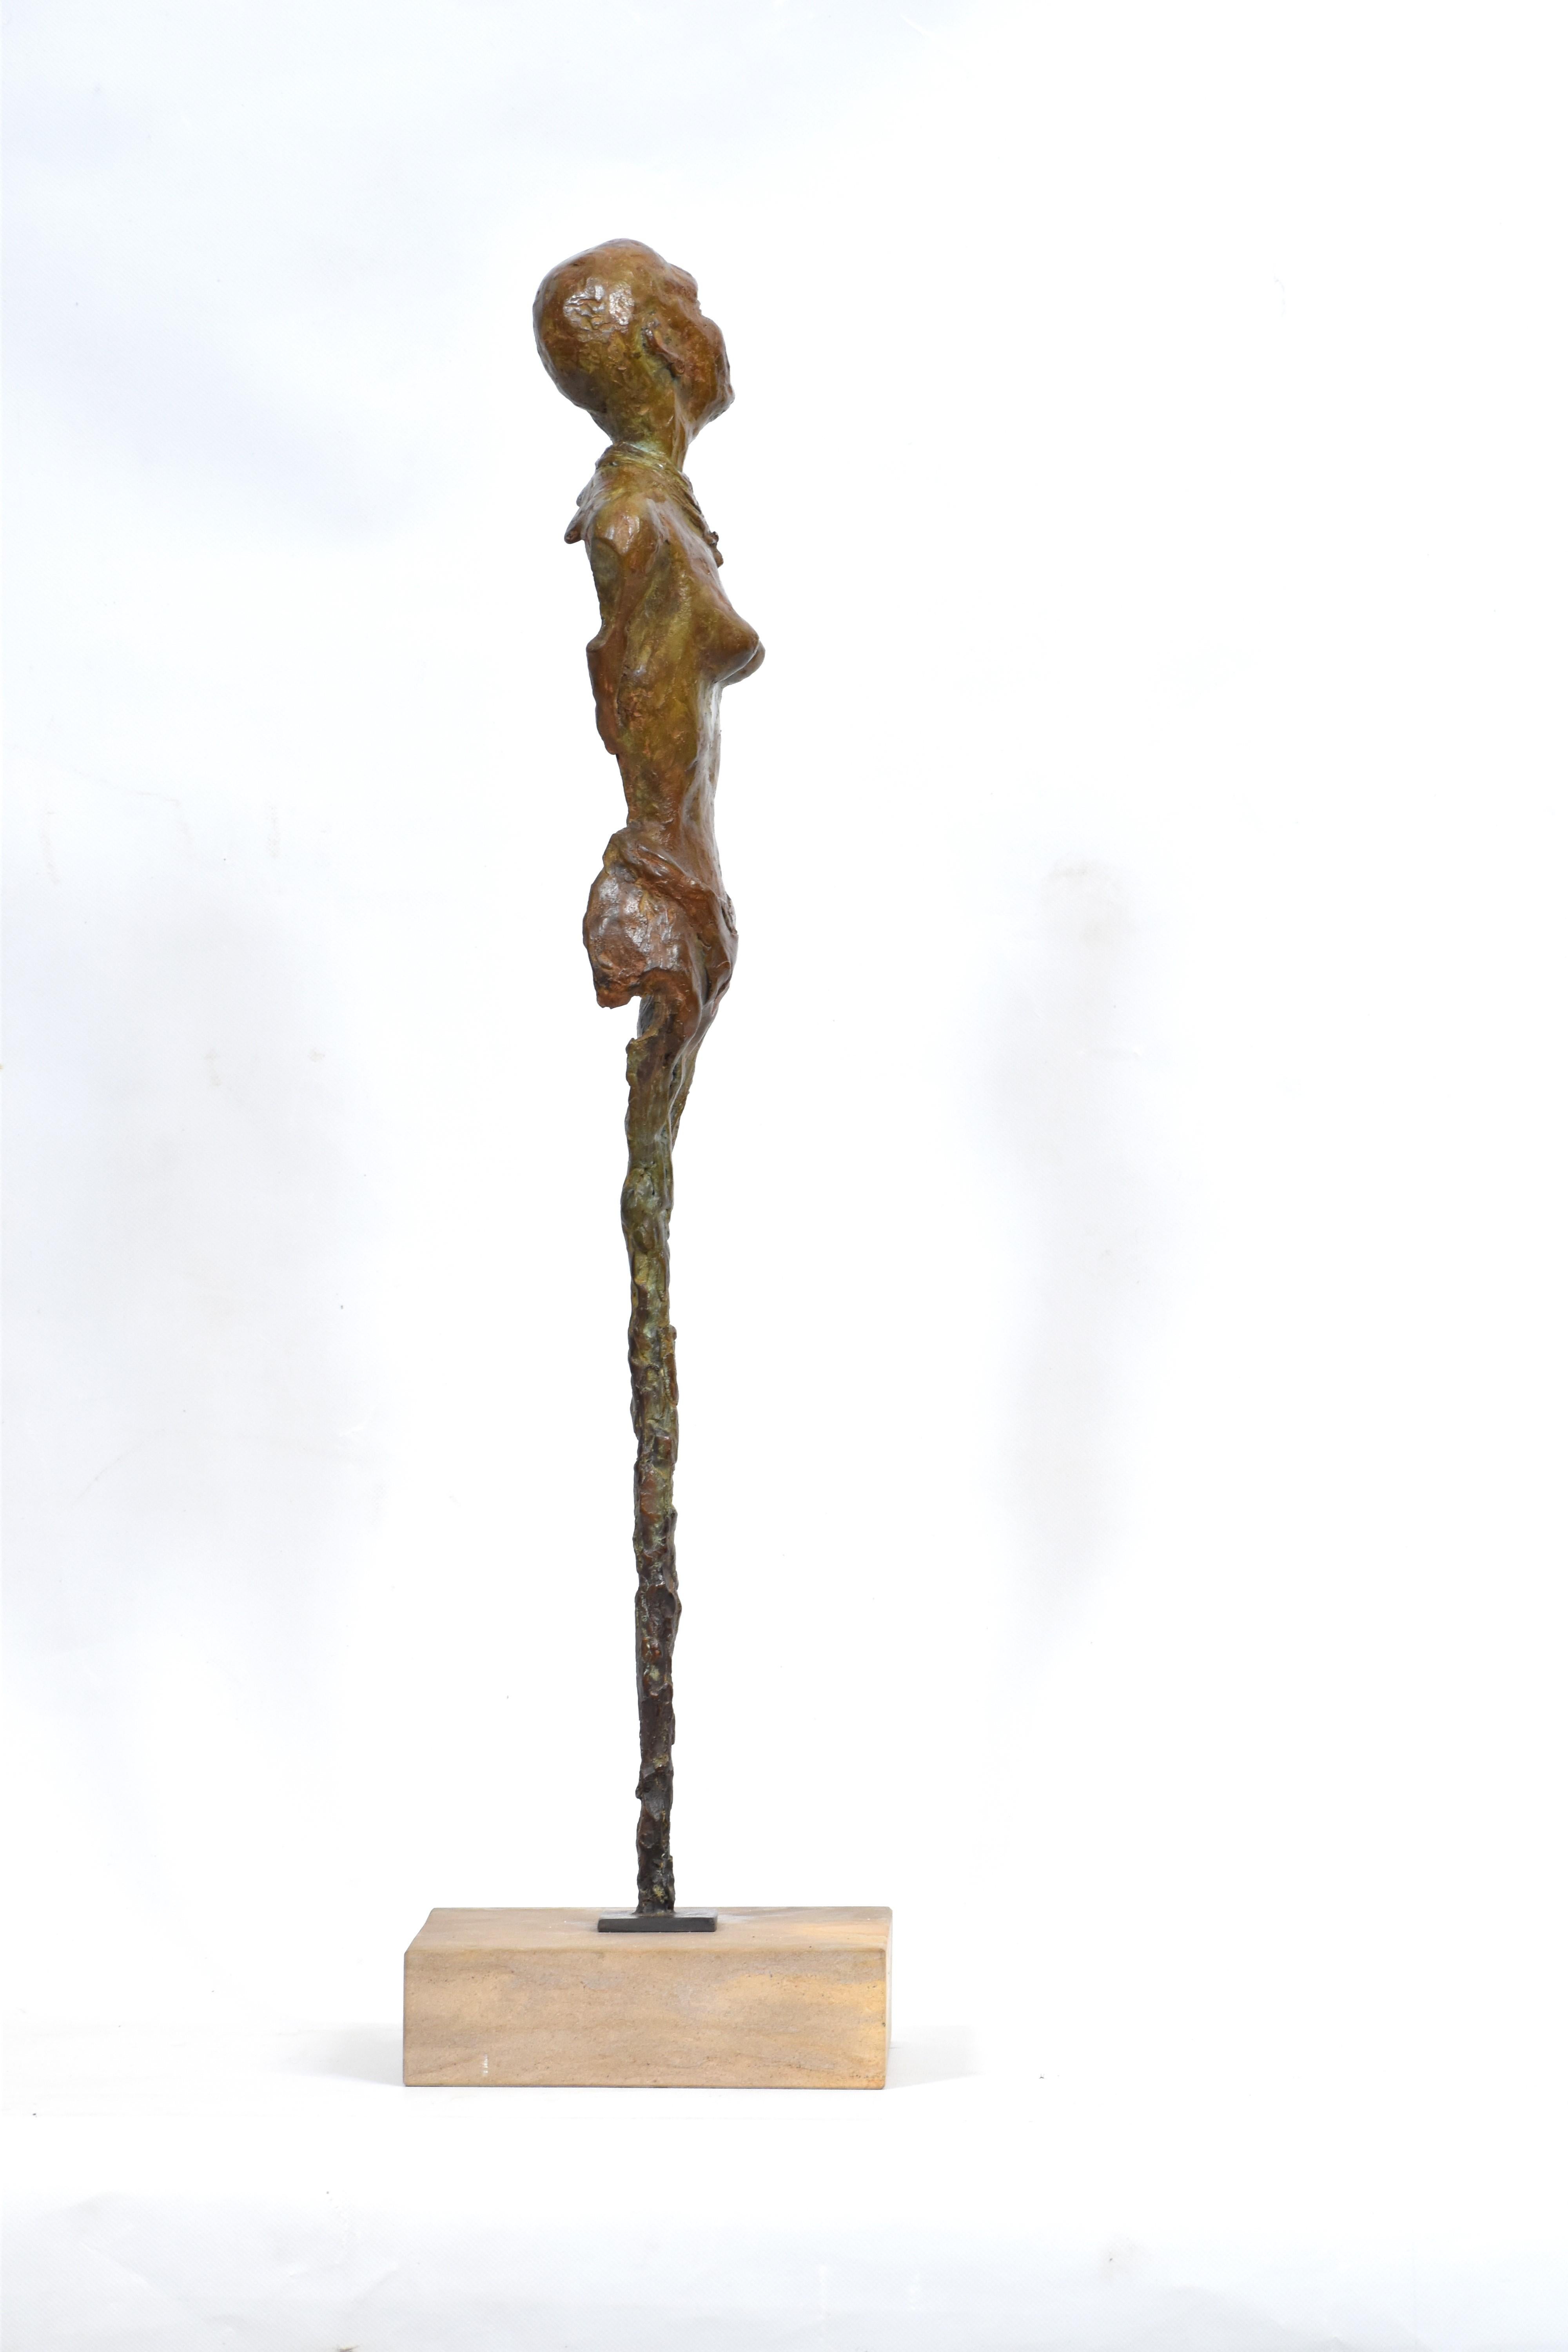 My Maasai girl sculpture carries the grace of the savanna in her stride, her life an eloquent dance of tradition and the vibrant strength of her heritage.

A Maasai girl, upon reaching adolescence, undergoes a traditional rite of passage known as